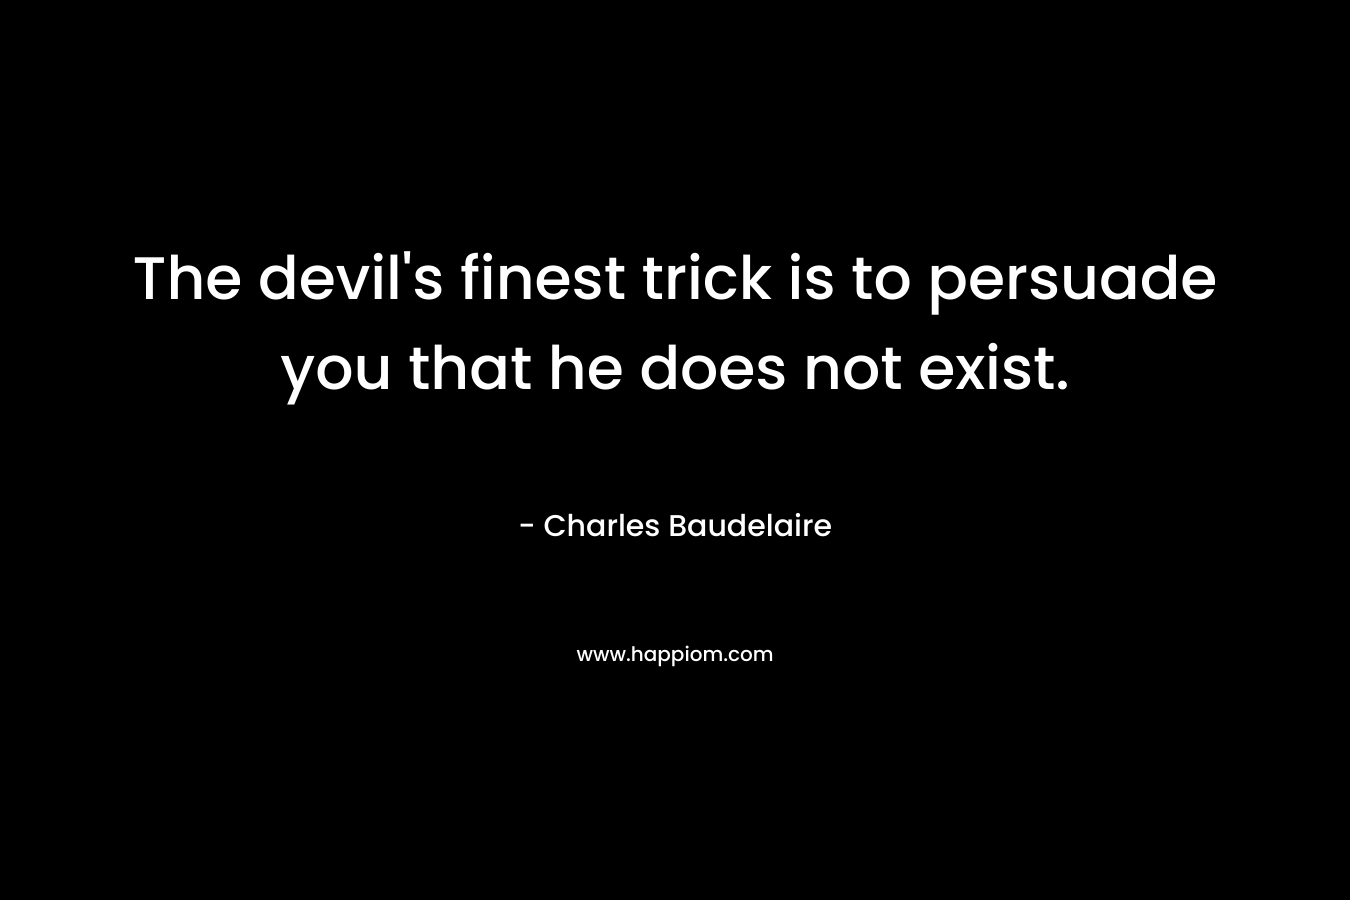 The devil’s finest trick is to persuade you that he does not exist. – Charles Baudelaire